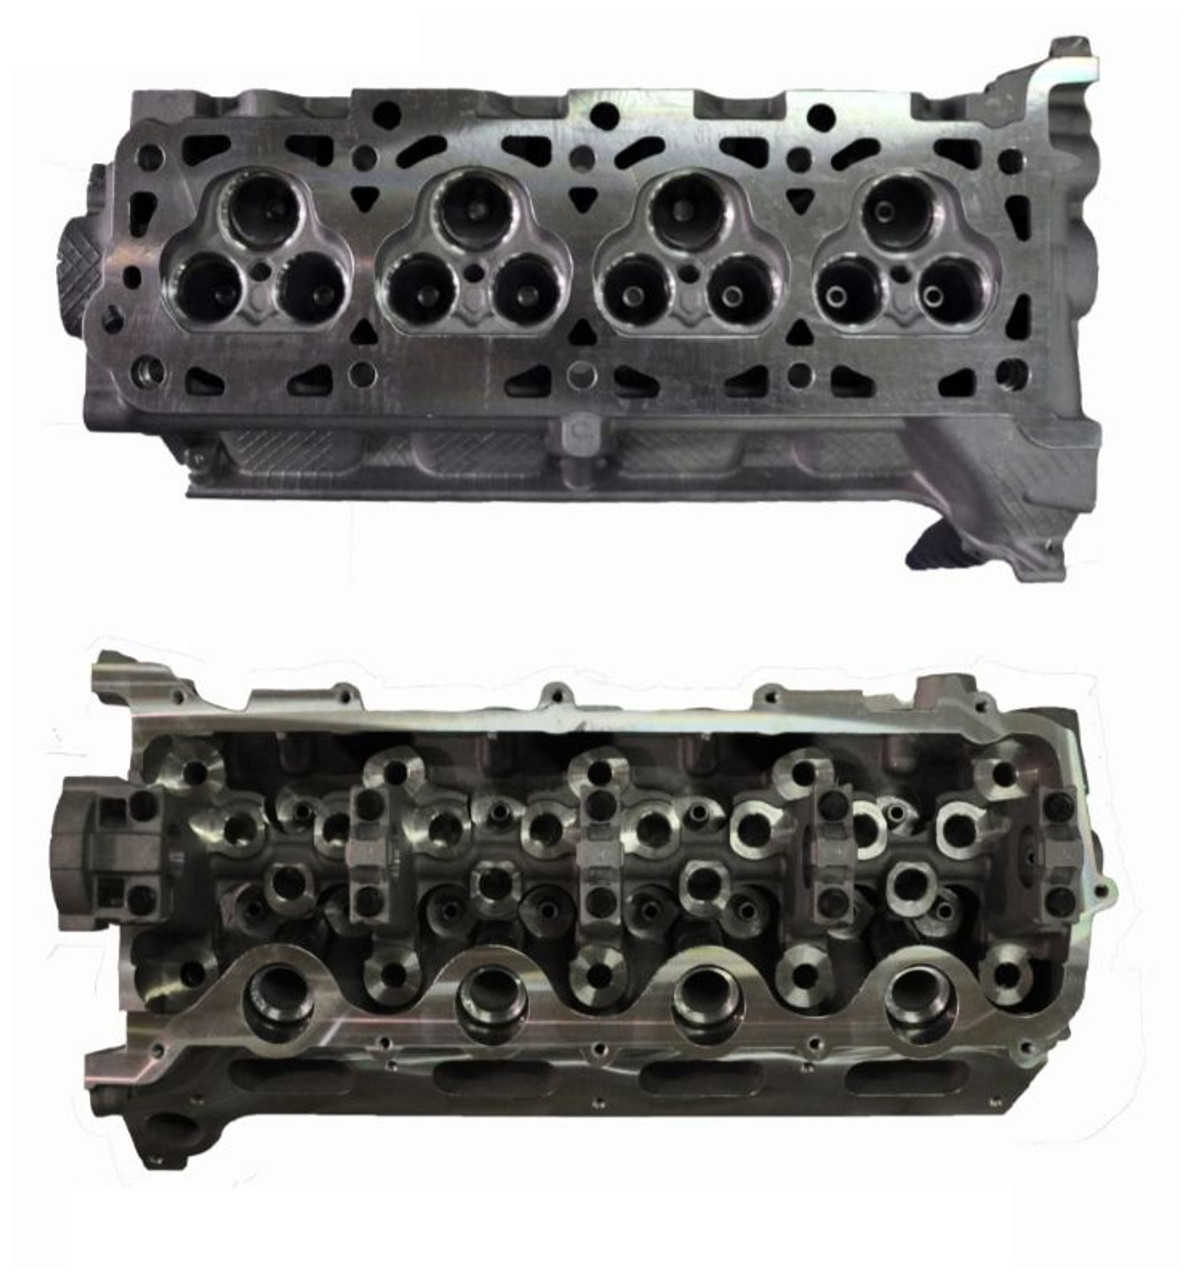 Cylinder Head - 2007 Ford Mustang 4.6L (EHF330R-2.C24)